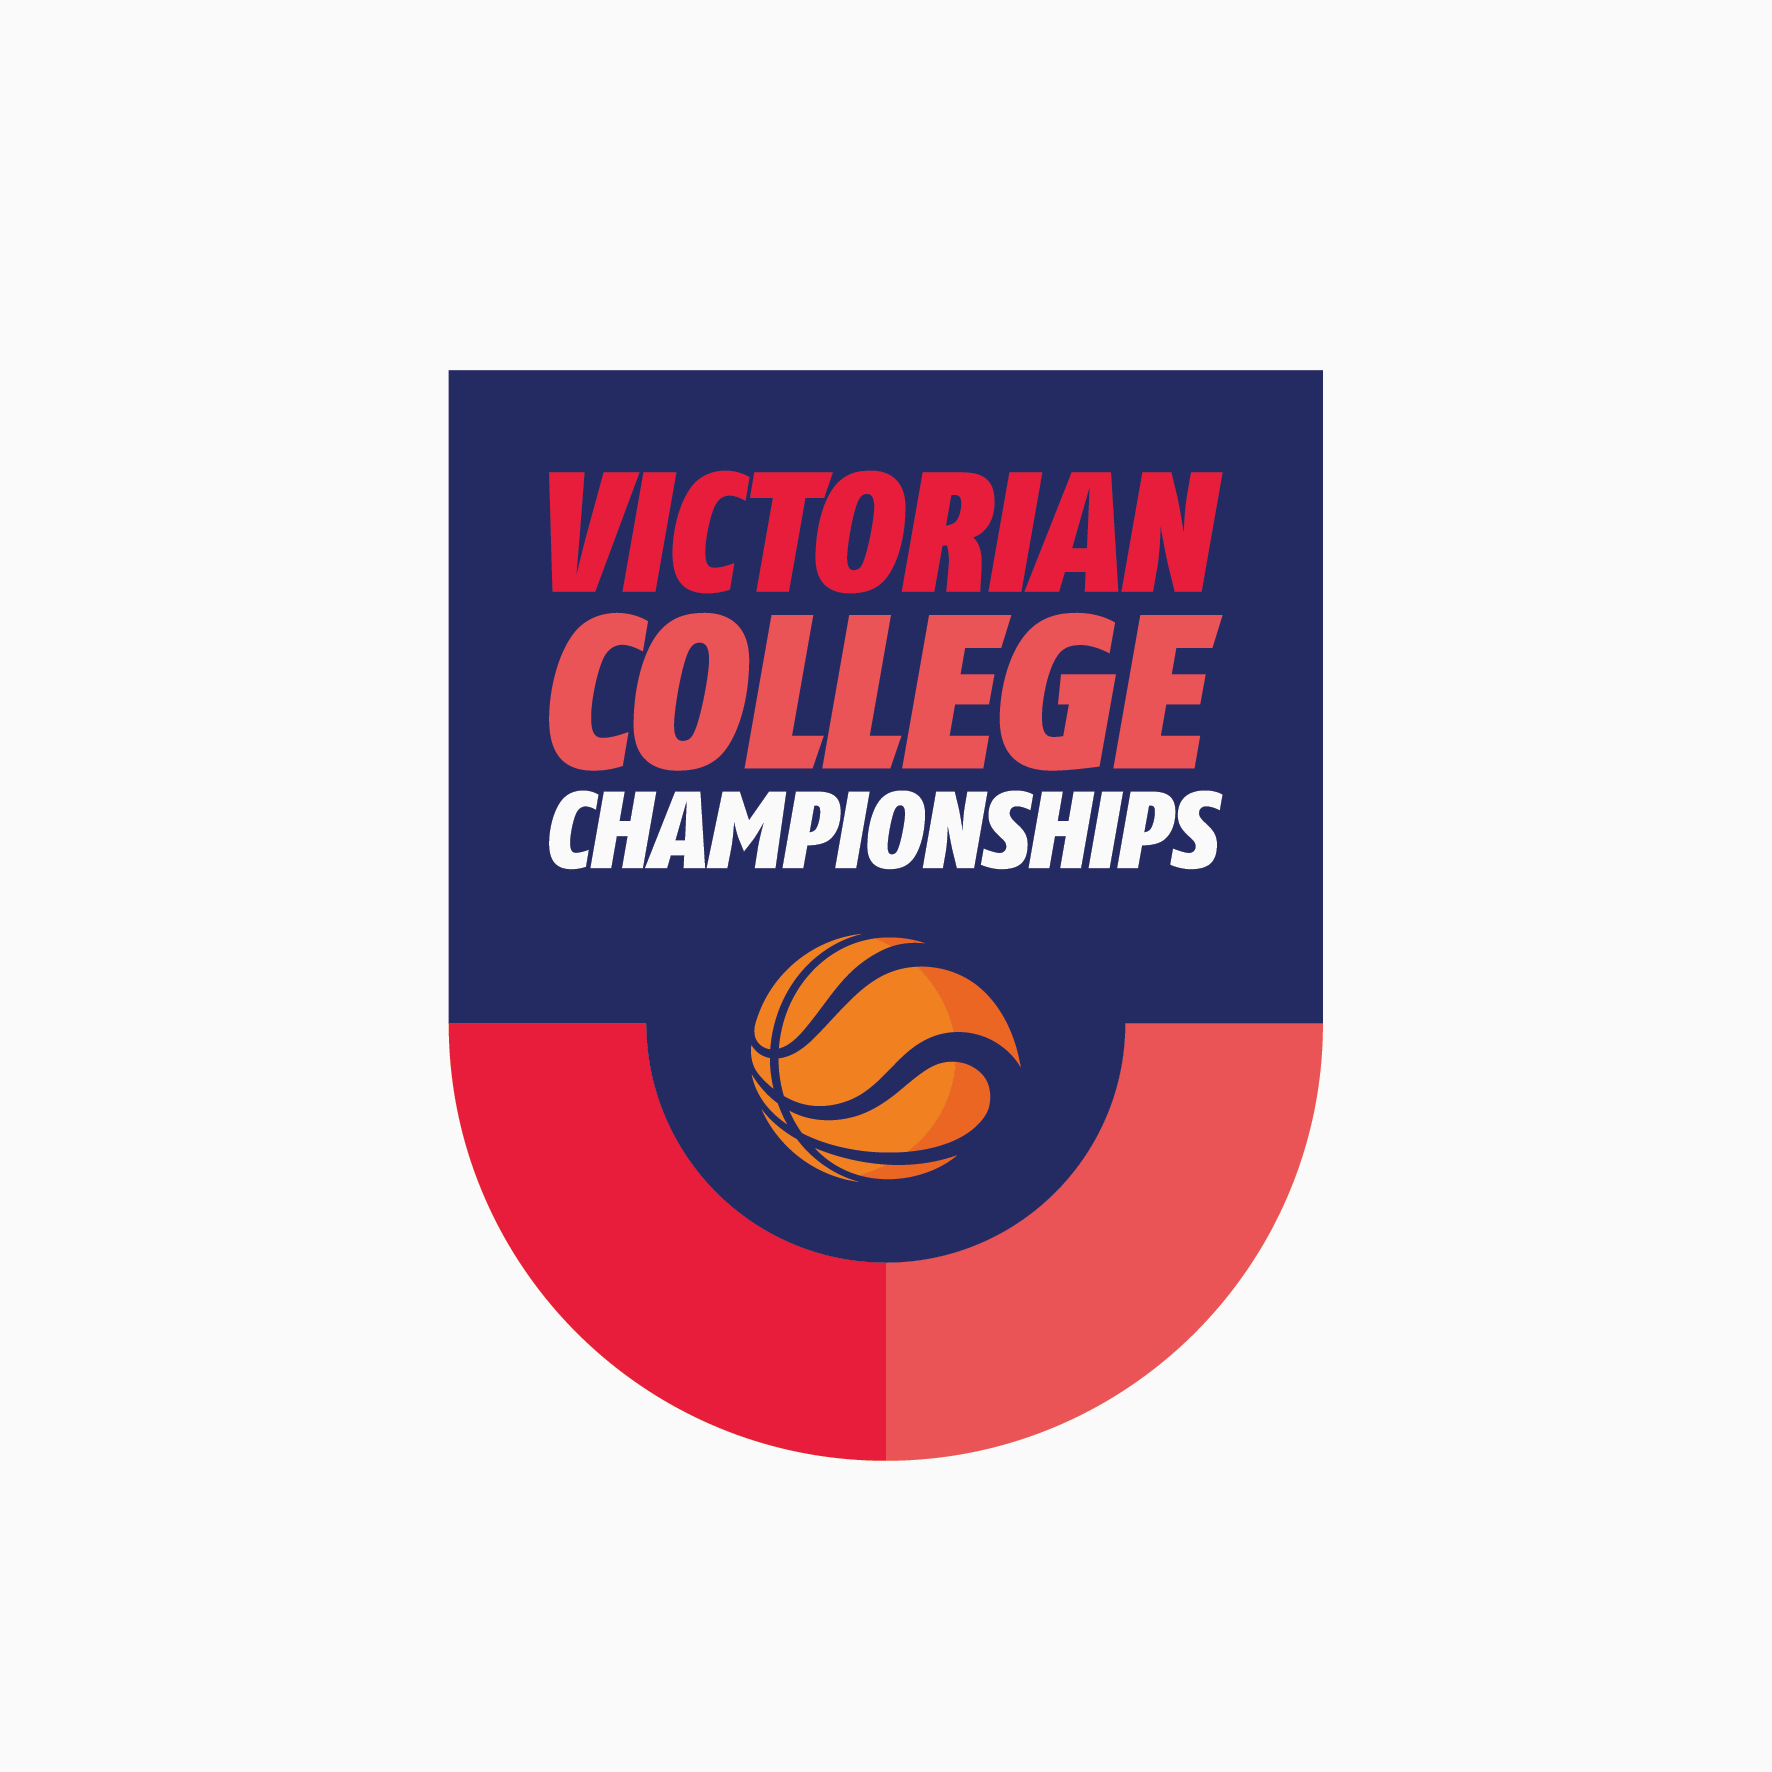 Victorian College Championships